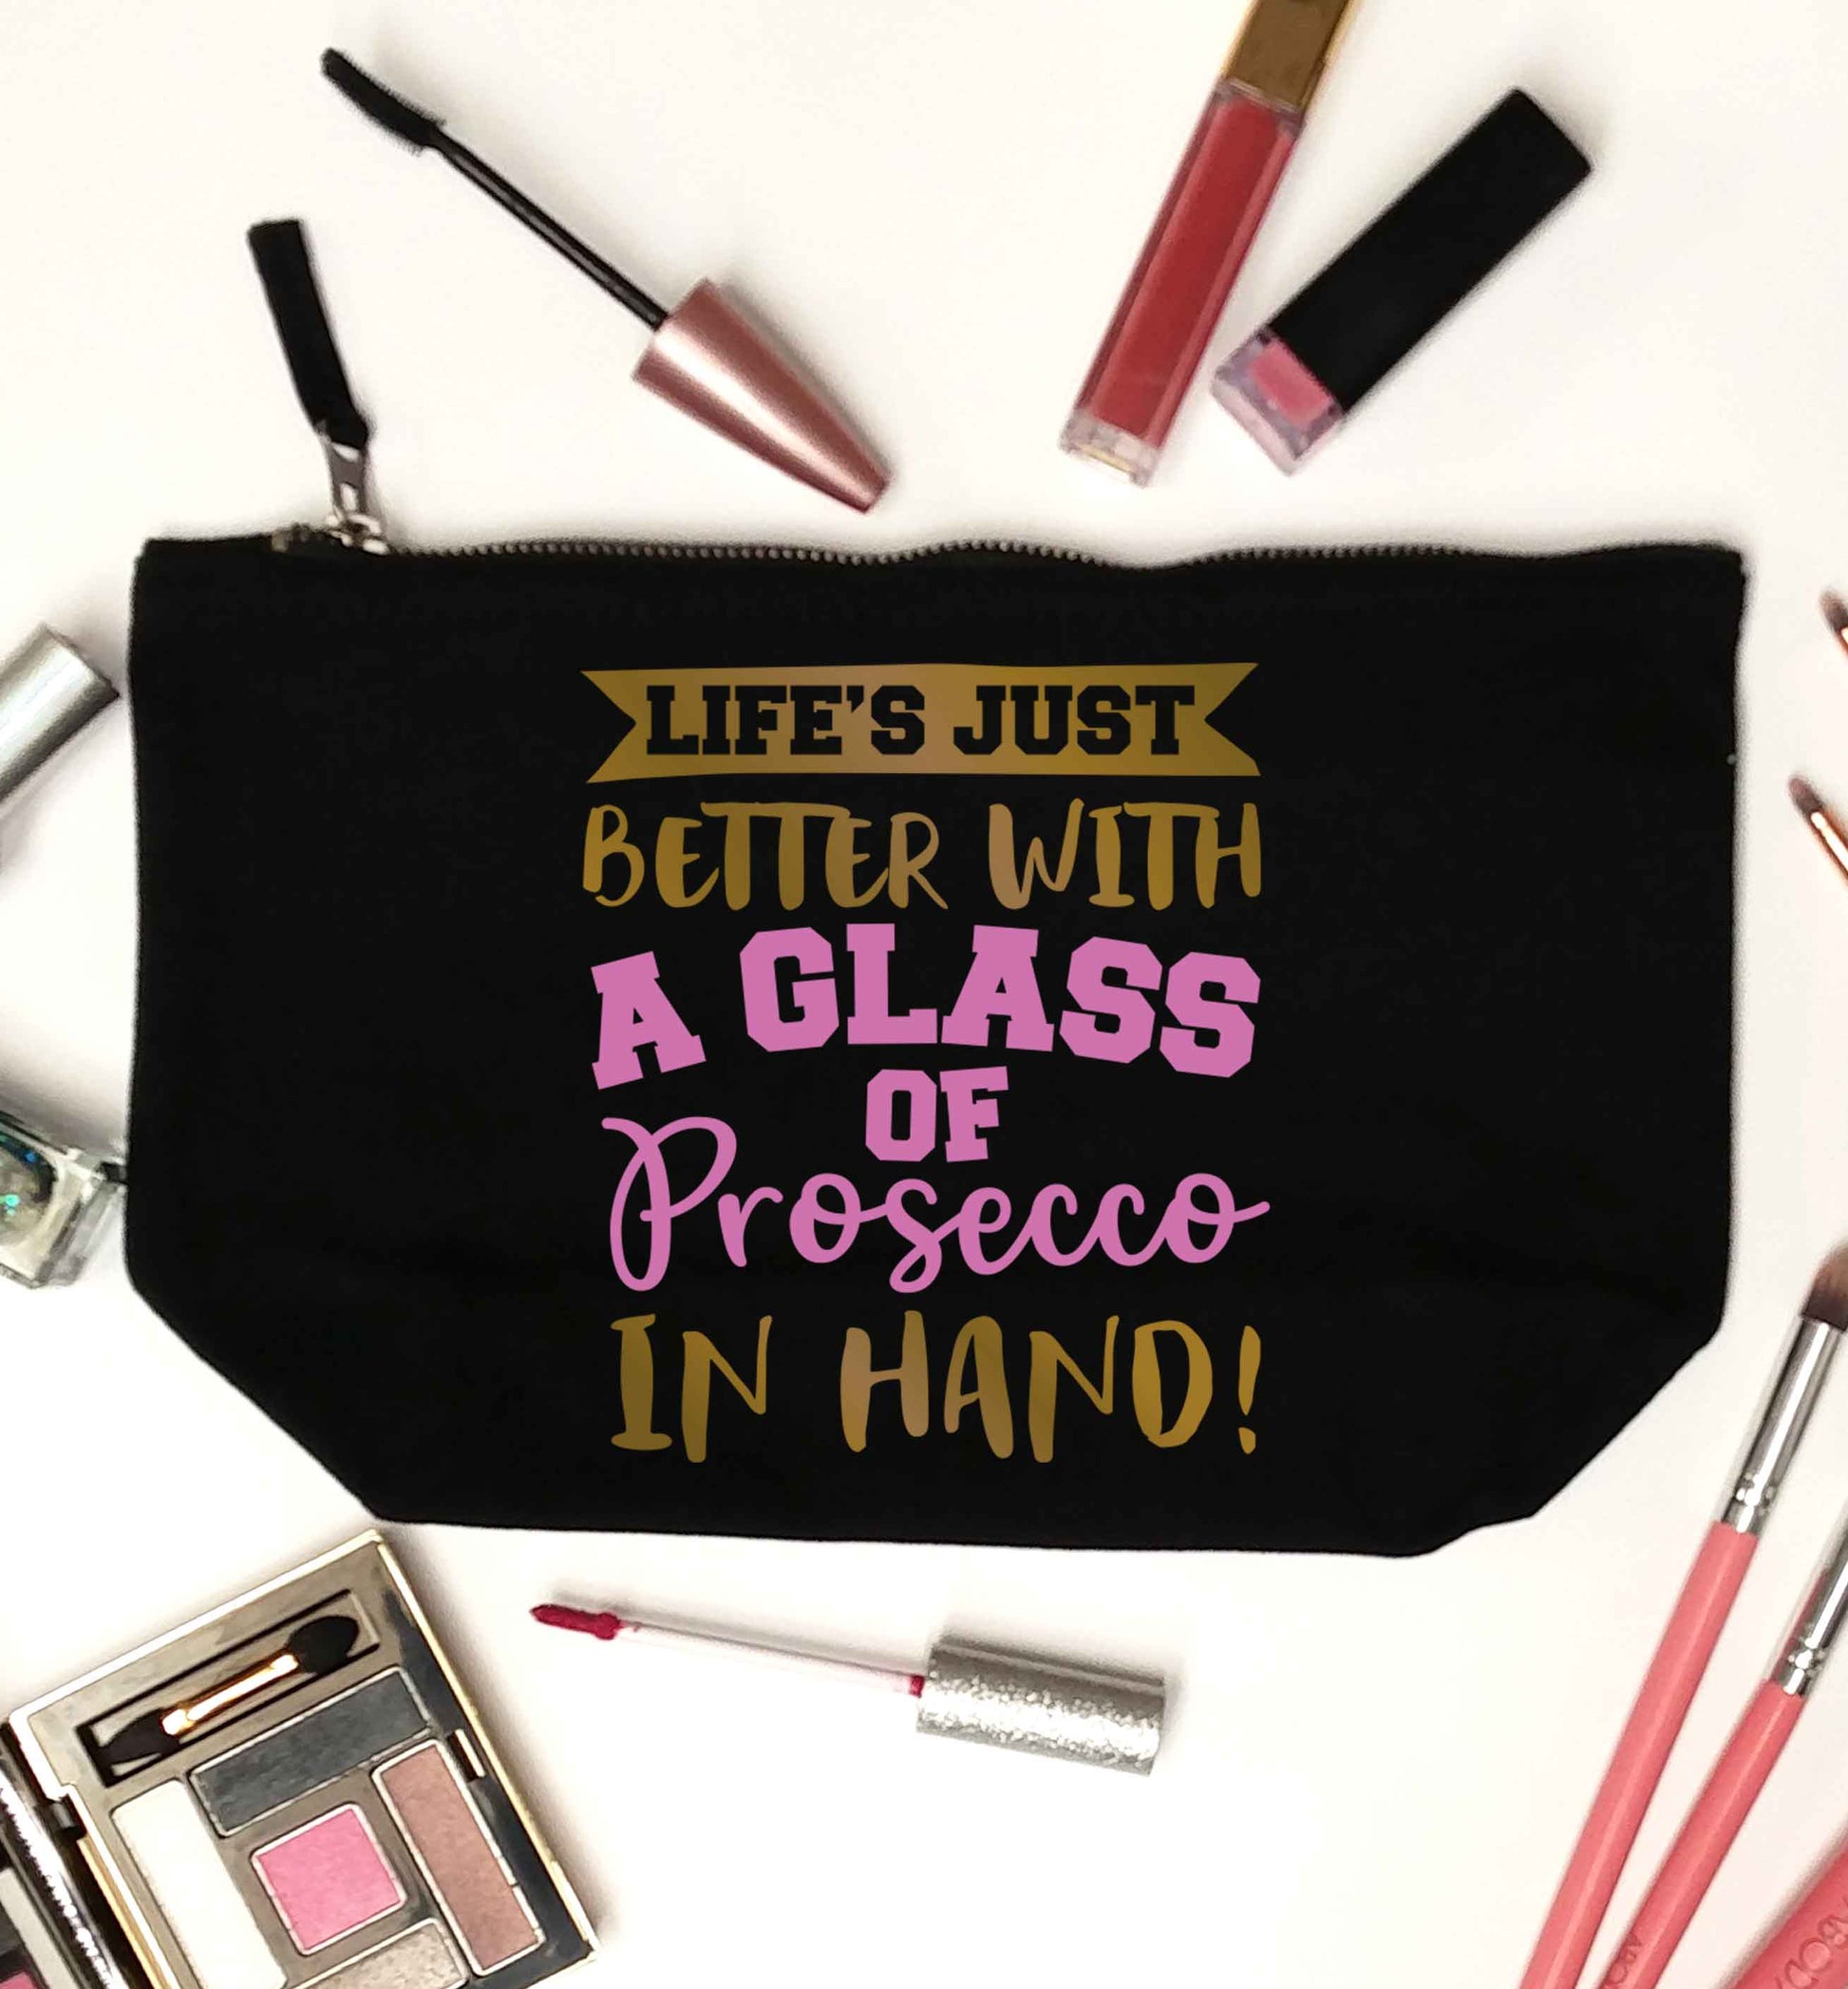 Life's just better with a glass of prosecco in hand black makeup bag